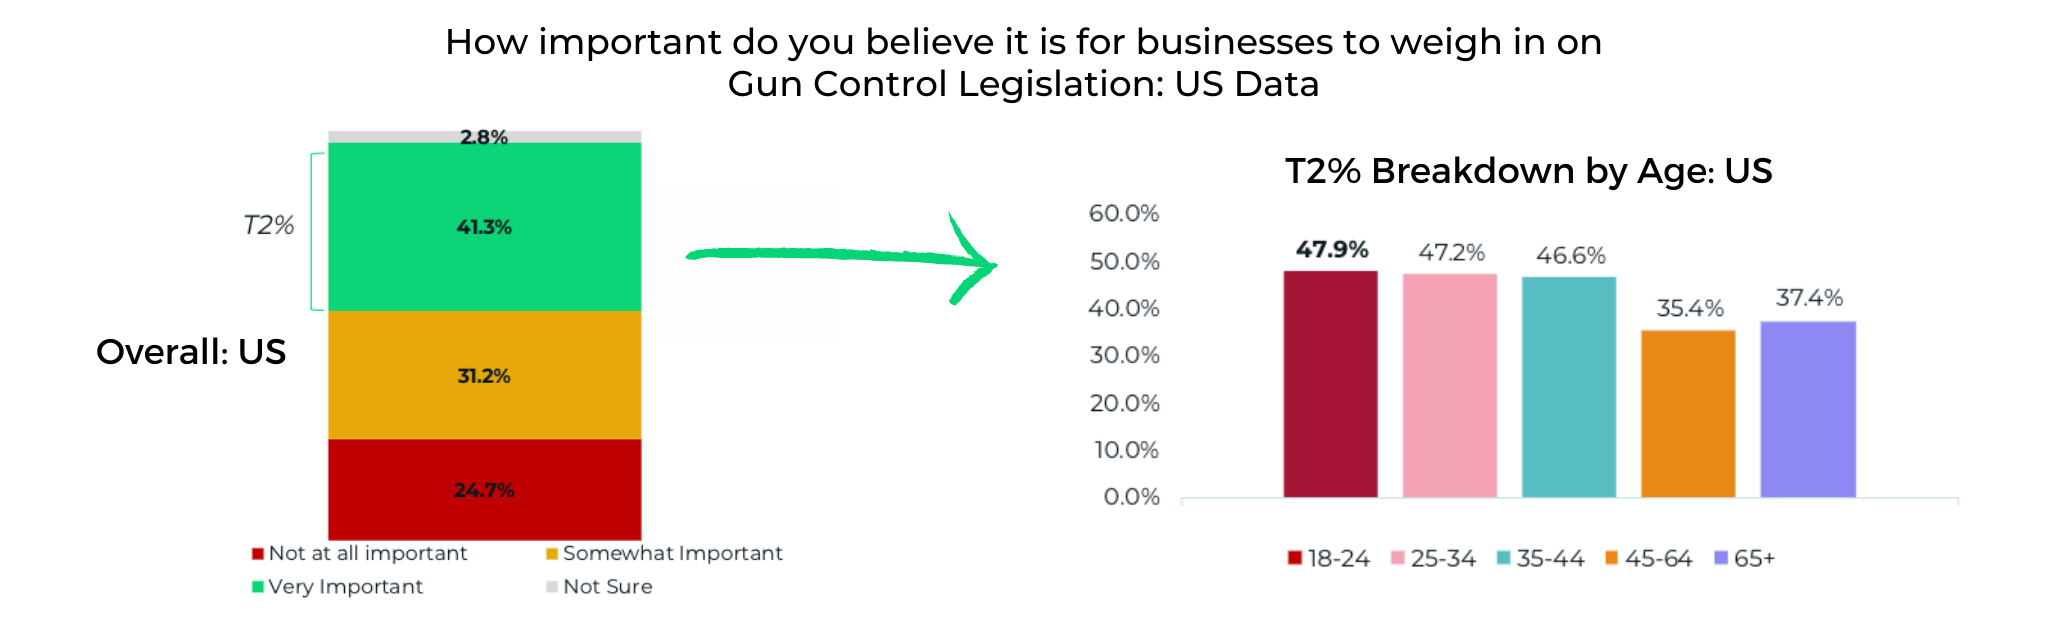 How important for businesses to weigh in on gun control legislation - US Data